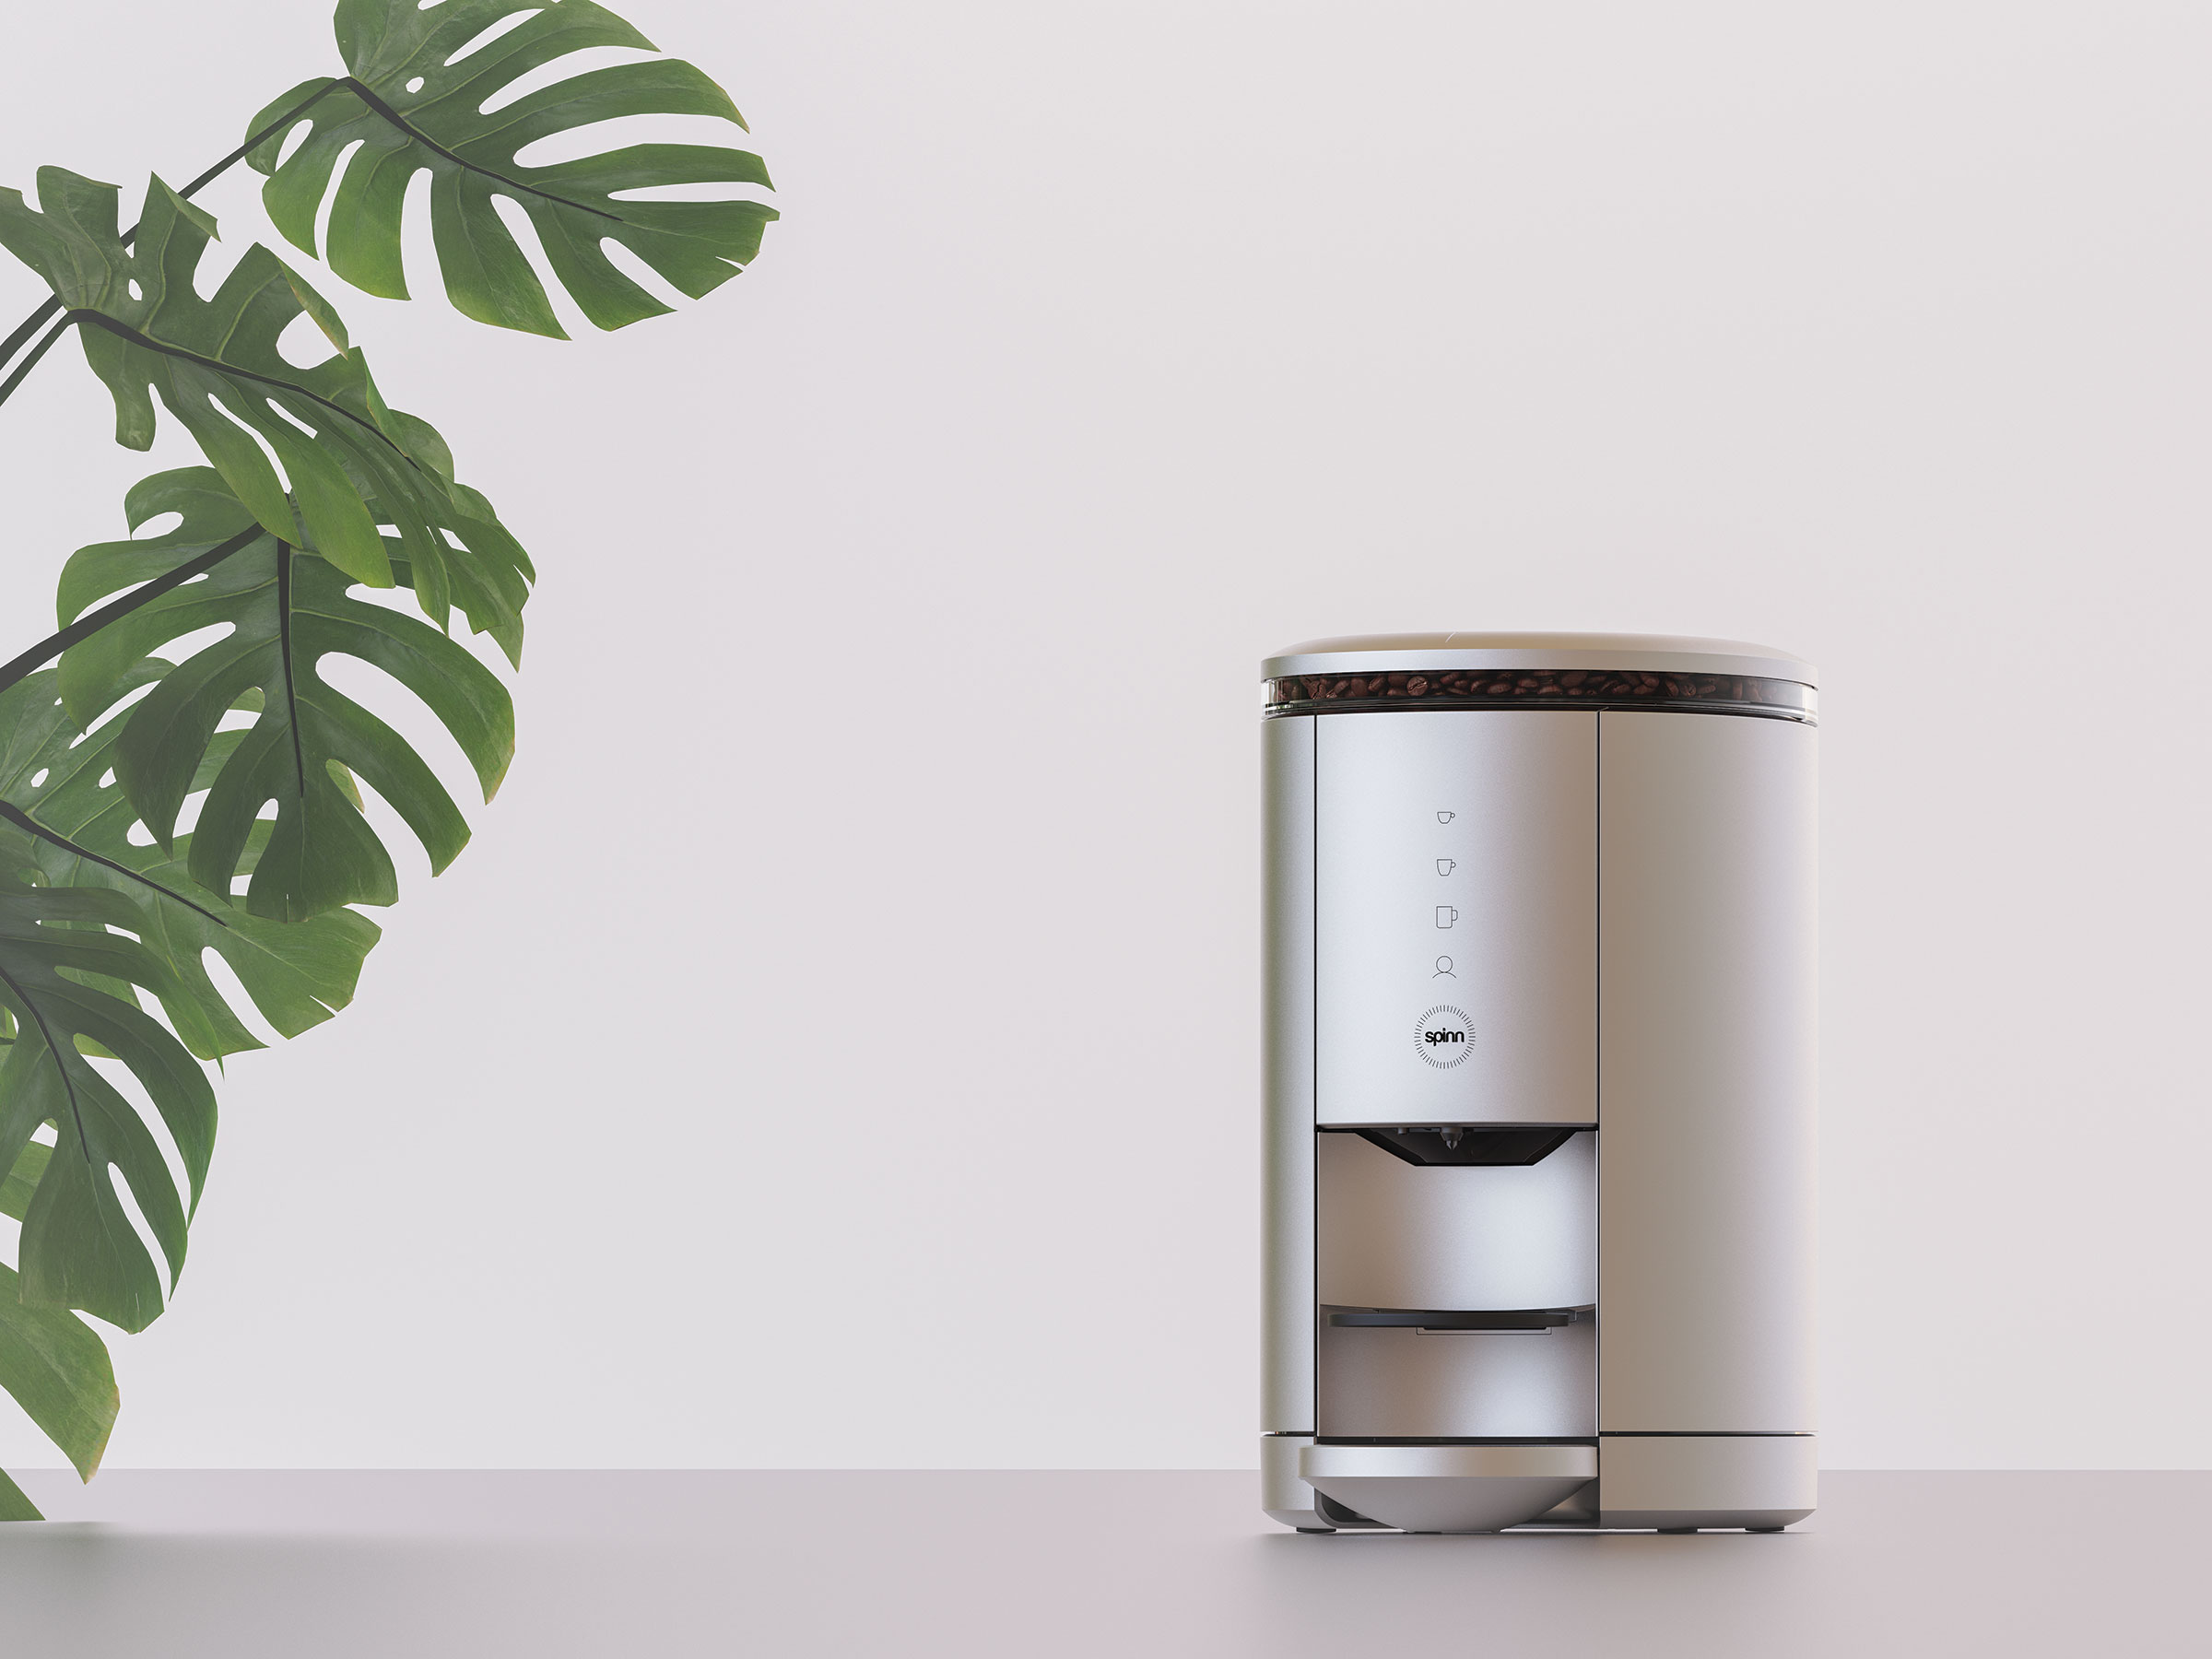 Spinn coffee machine review: Is this the coffee maker of the future?